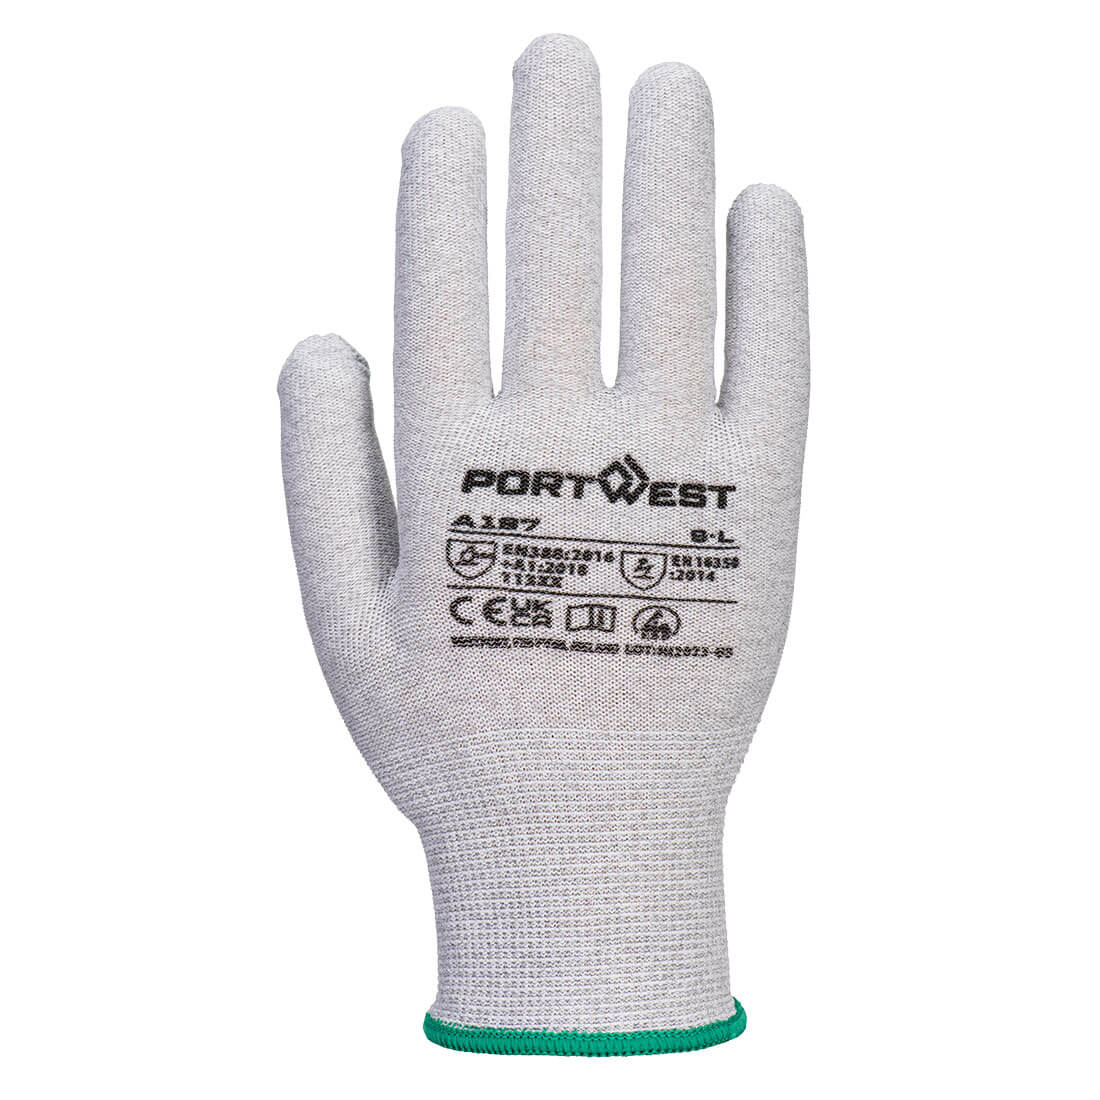 PortWest Unisex Antistatic Shell Grey Various Size A197 